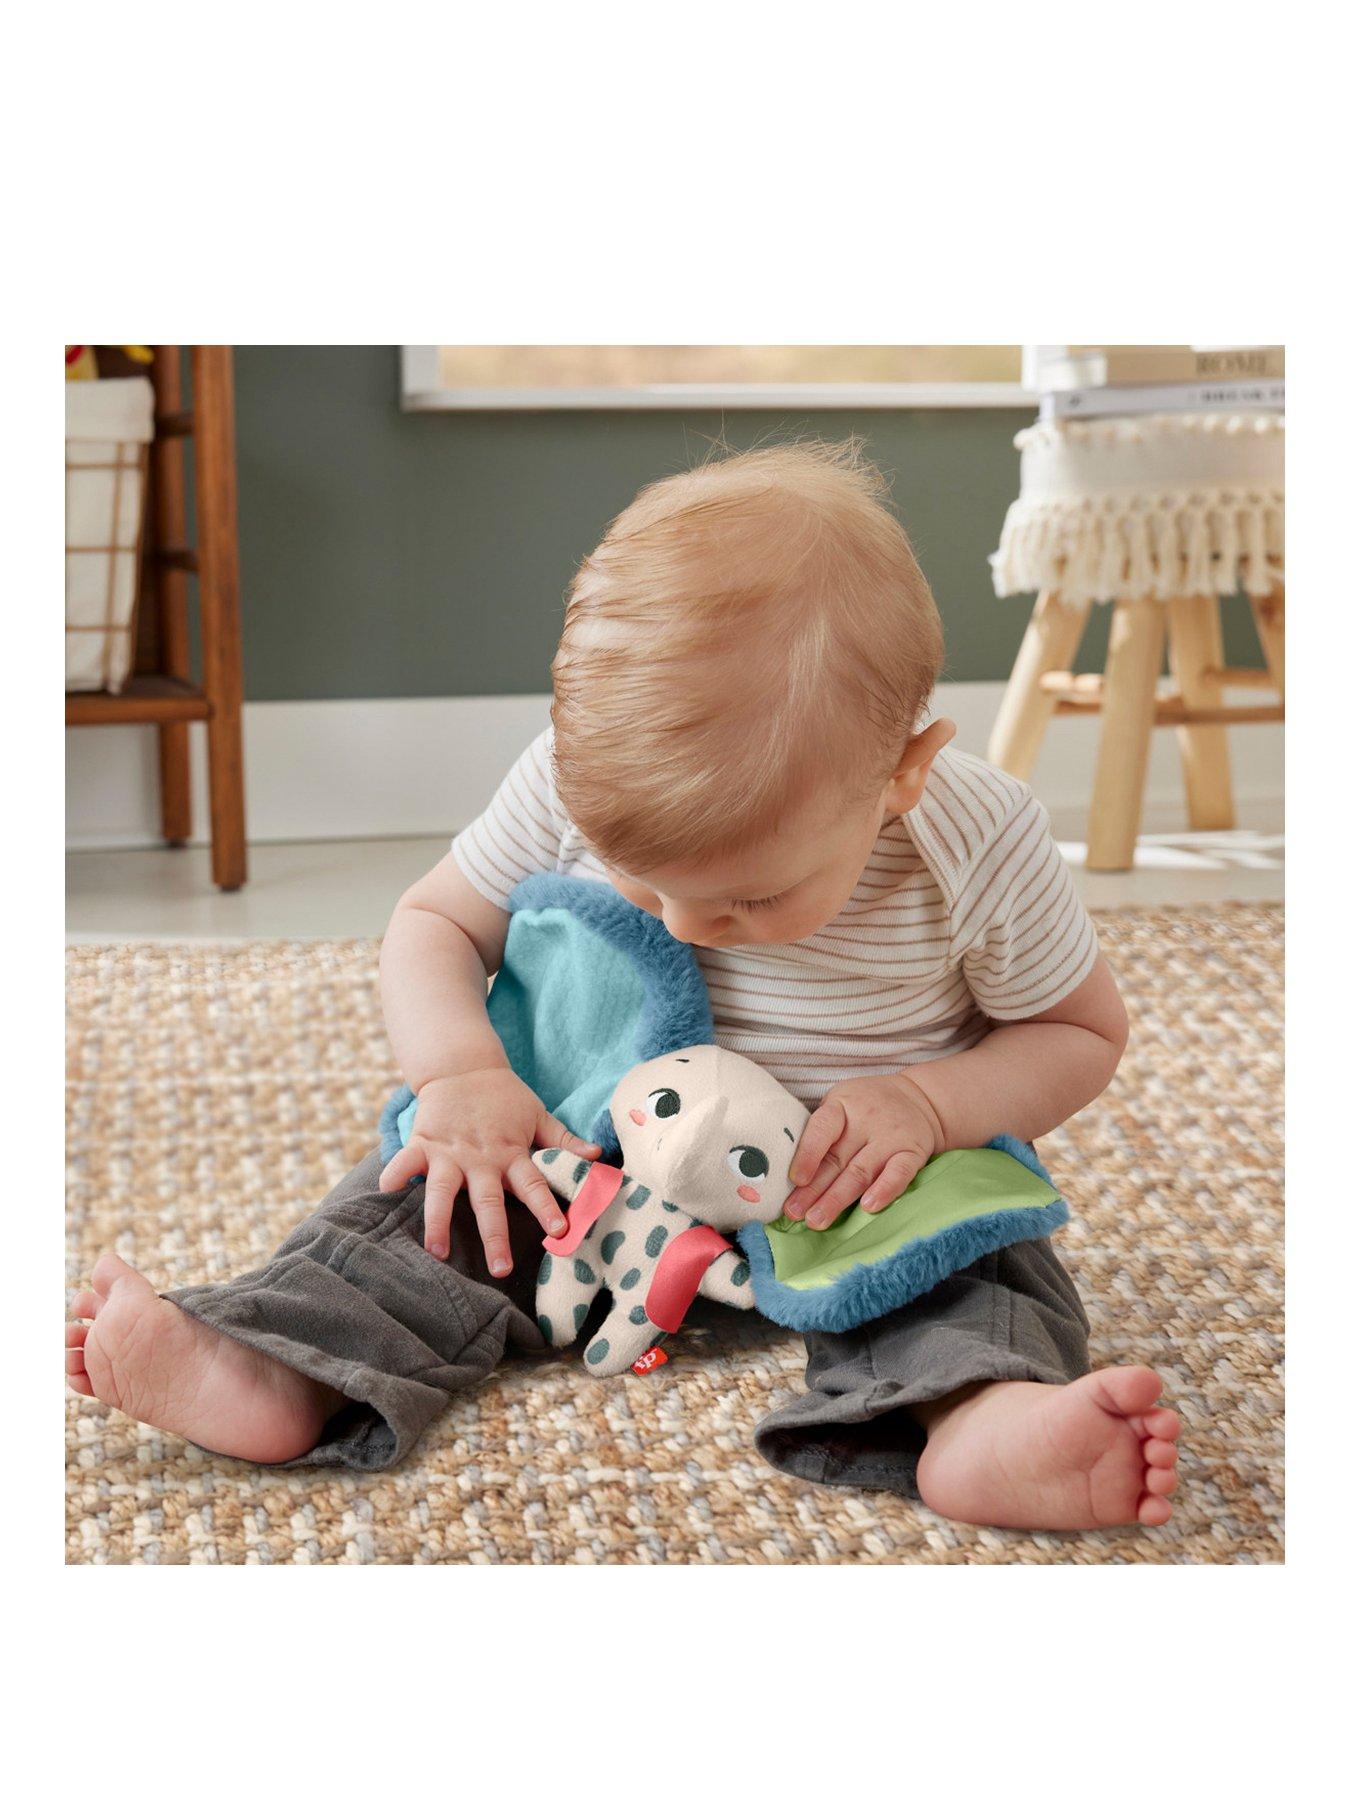 Star Plushie - Soft Plush Star Toy for Kids – Bumbles & Boo